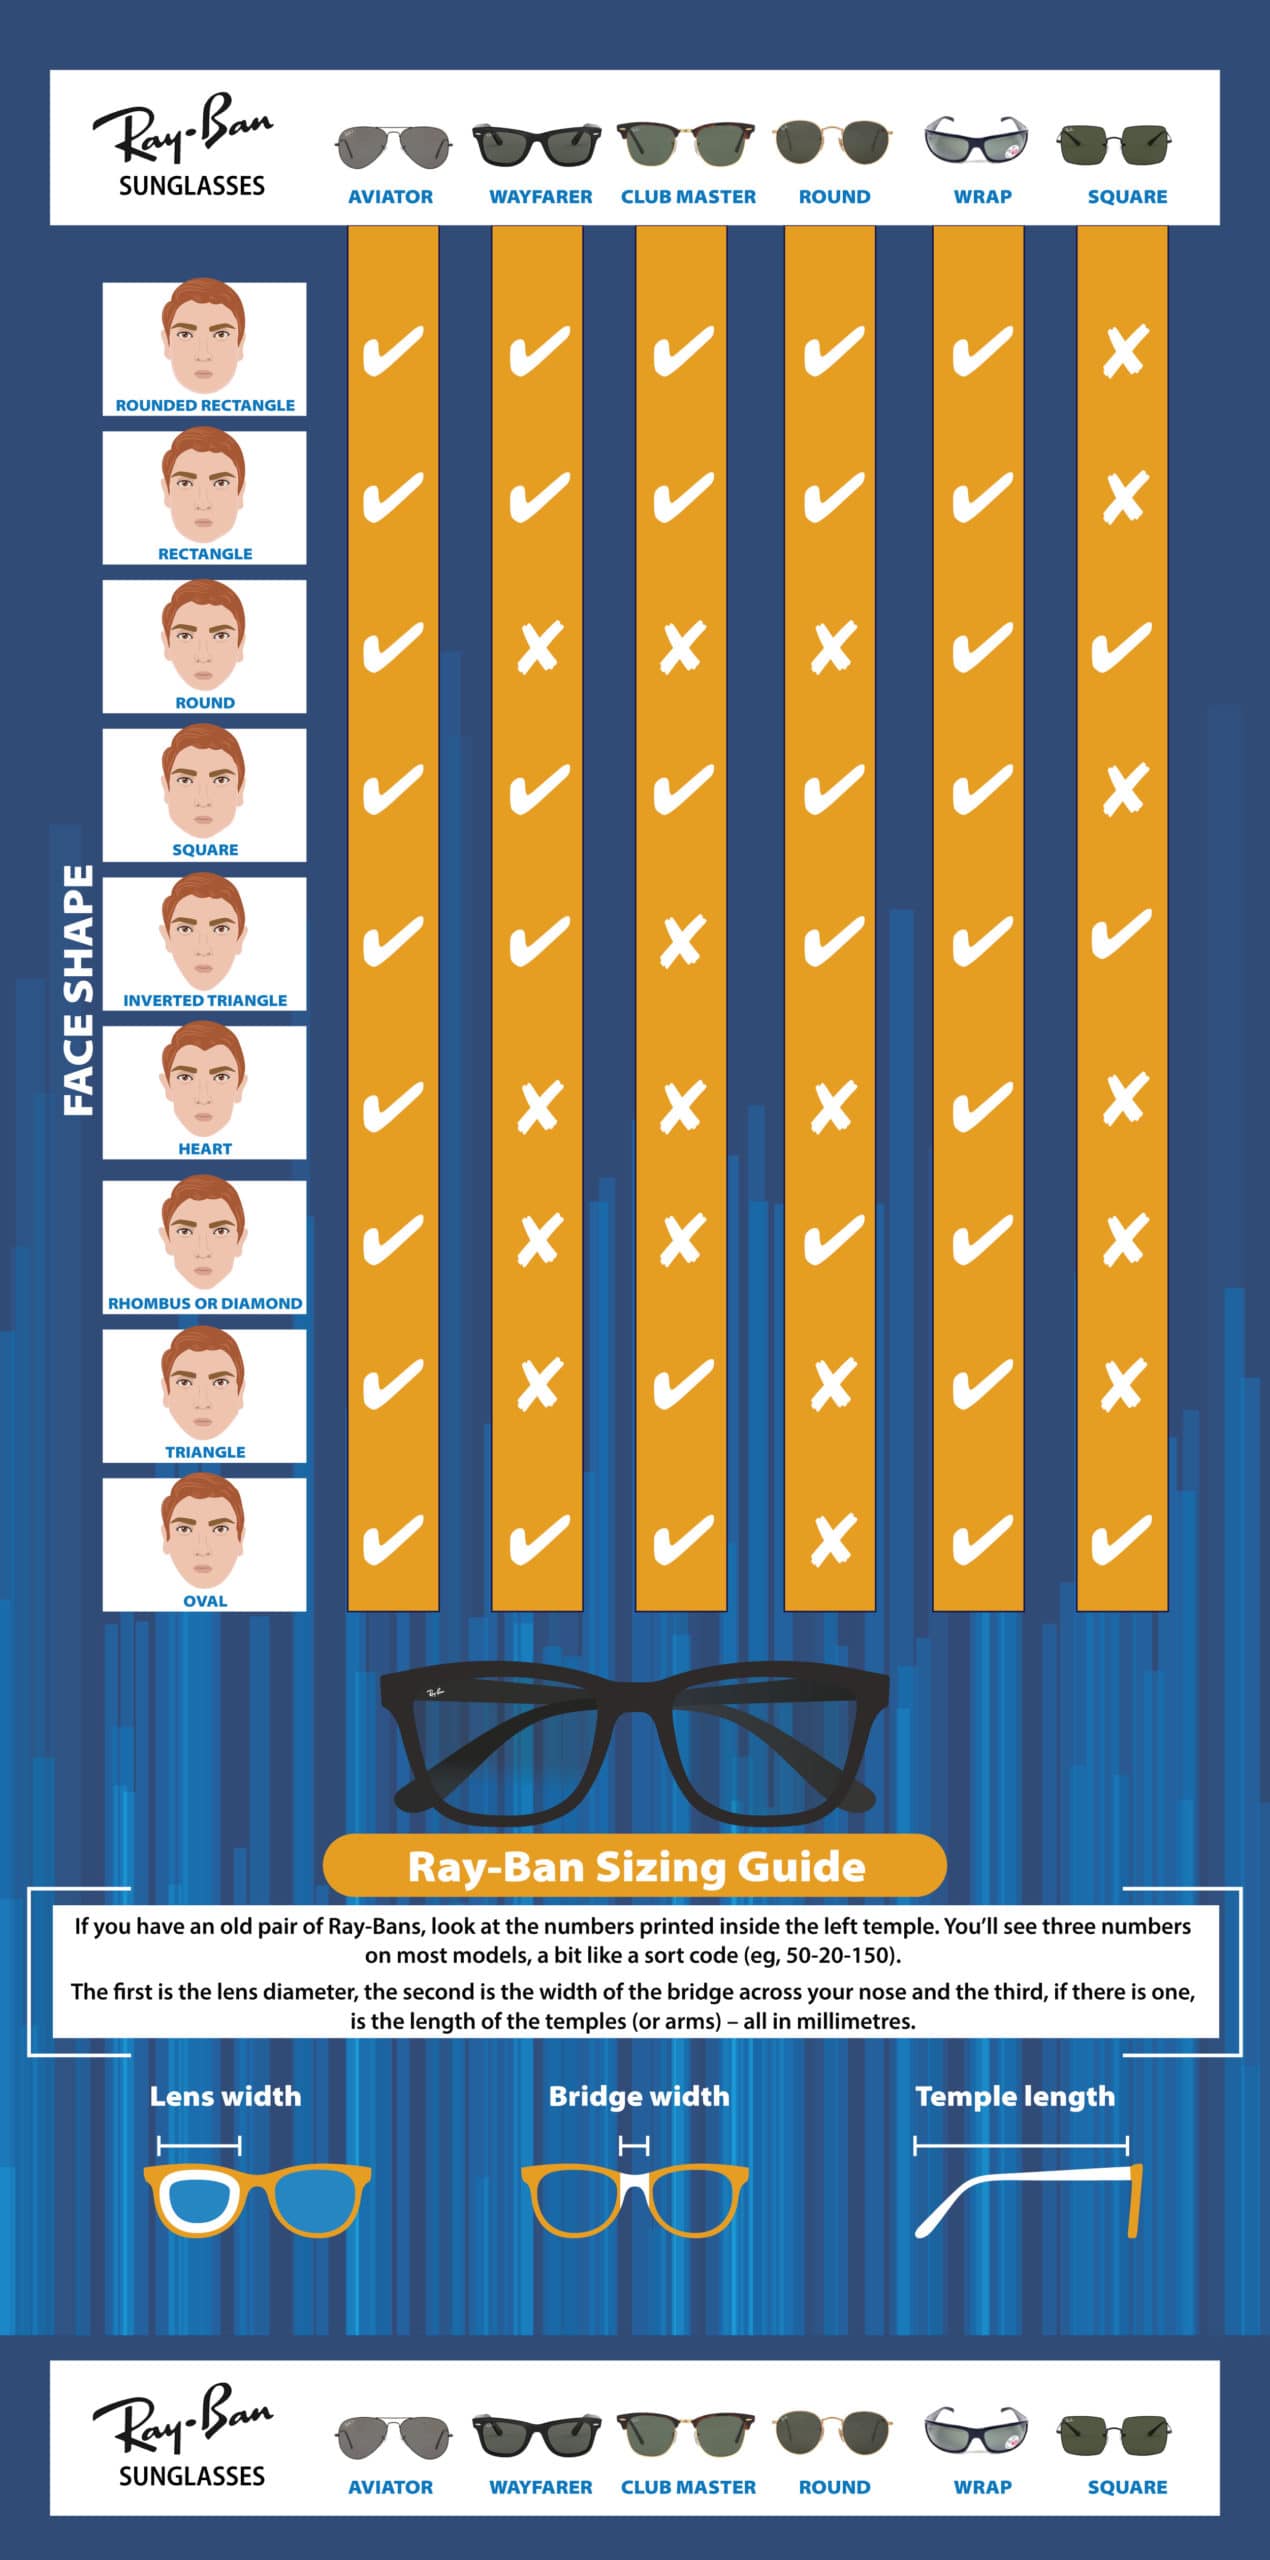 Everything You Need To Know About Selecting Ray-Ban Sunglasses Infographic